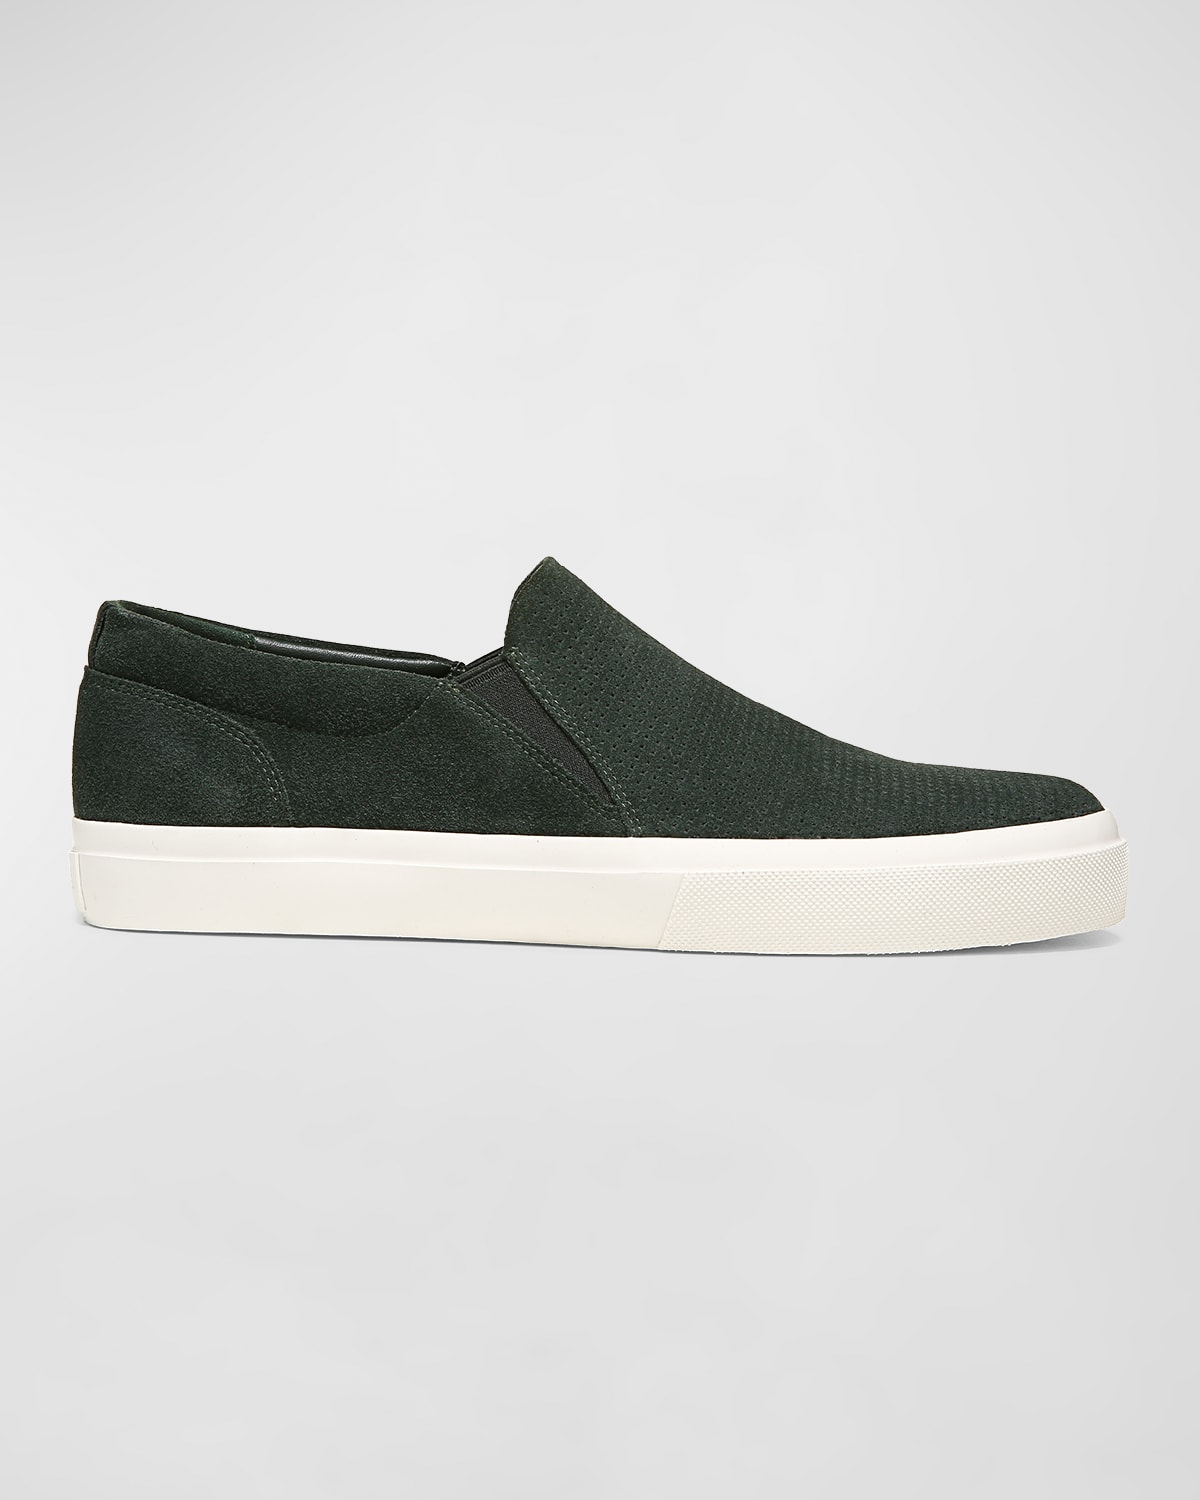 VINCE MEN'S FLETCHER PERFORATED SUEDE SLIP-ON SNEAKERS